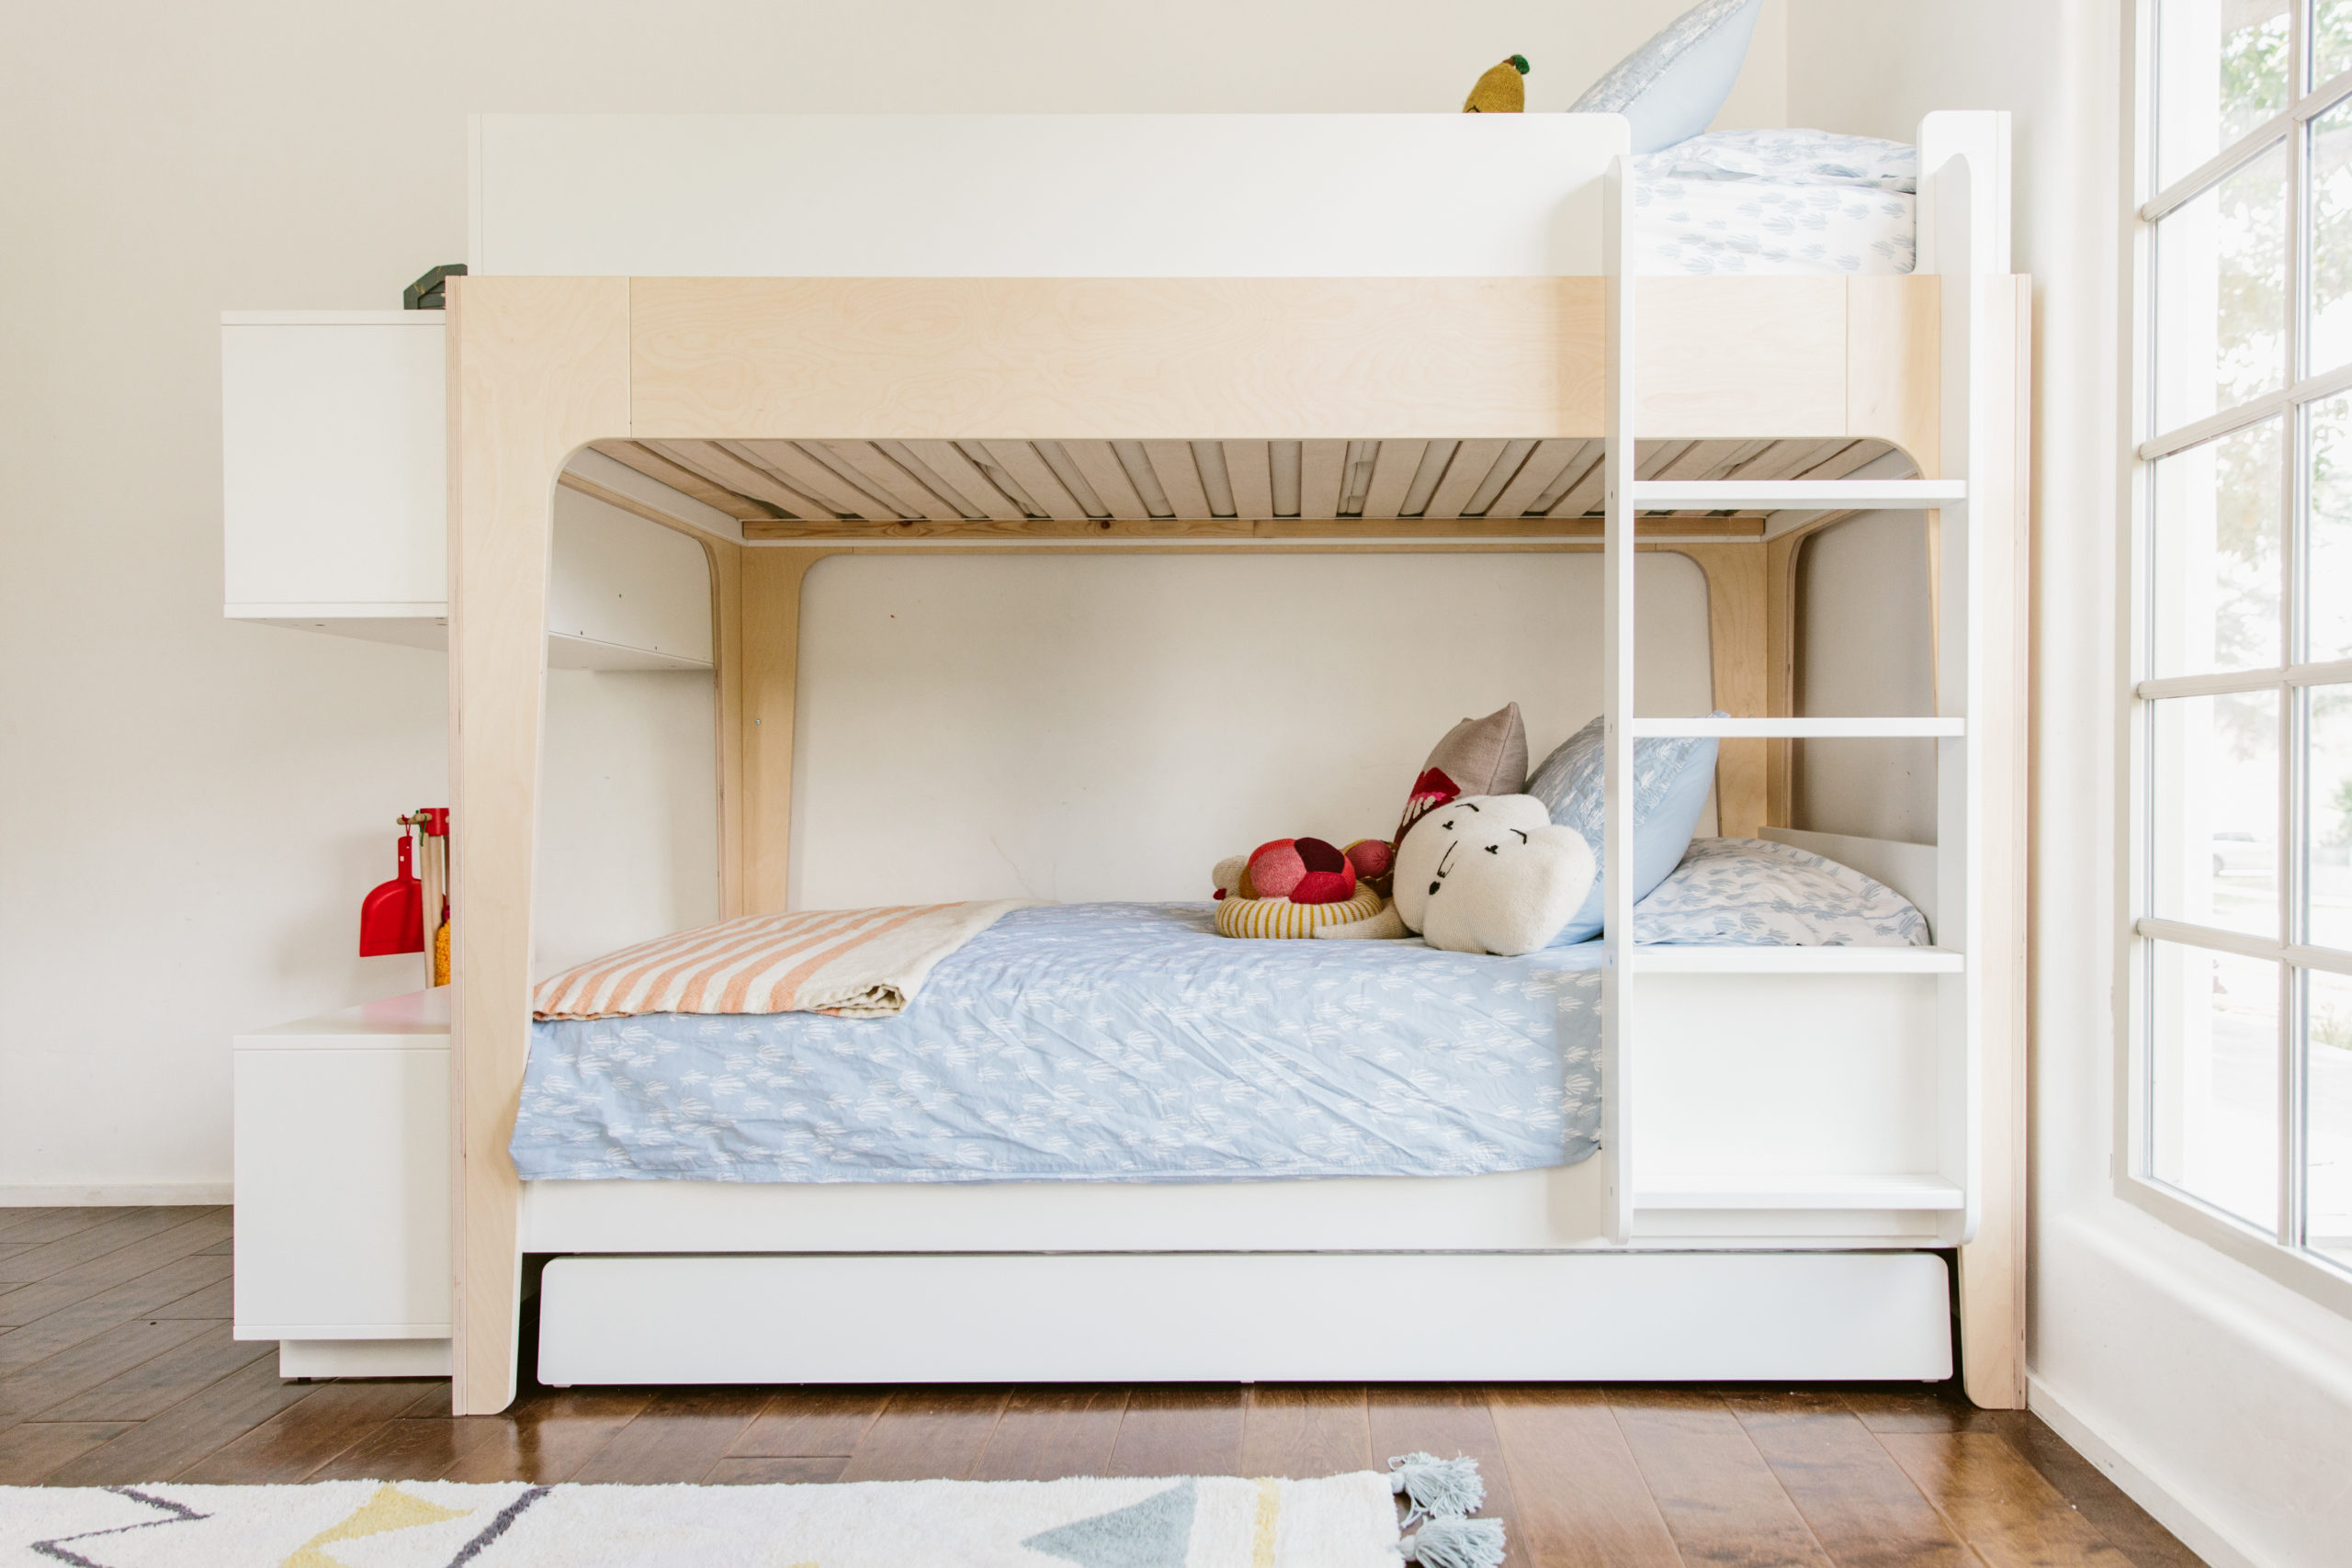 Costa Paolo S Bedroom Makeover, Oeuf Nyc Bunk Bed